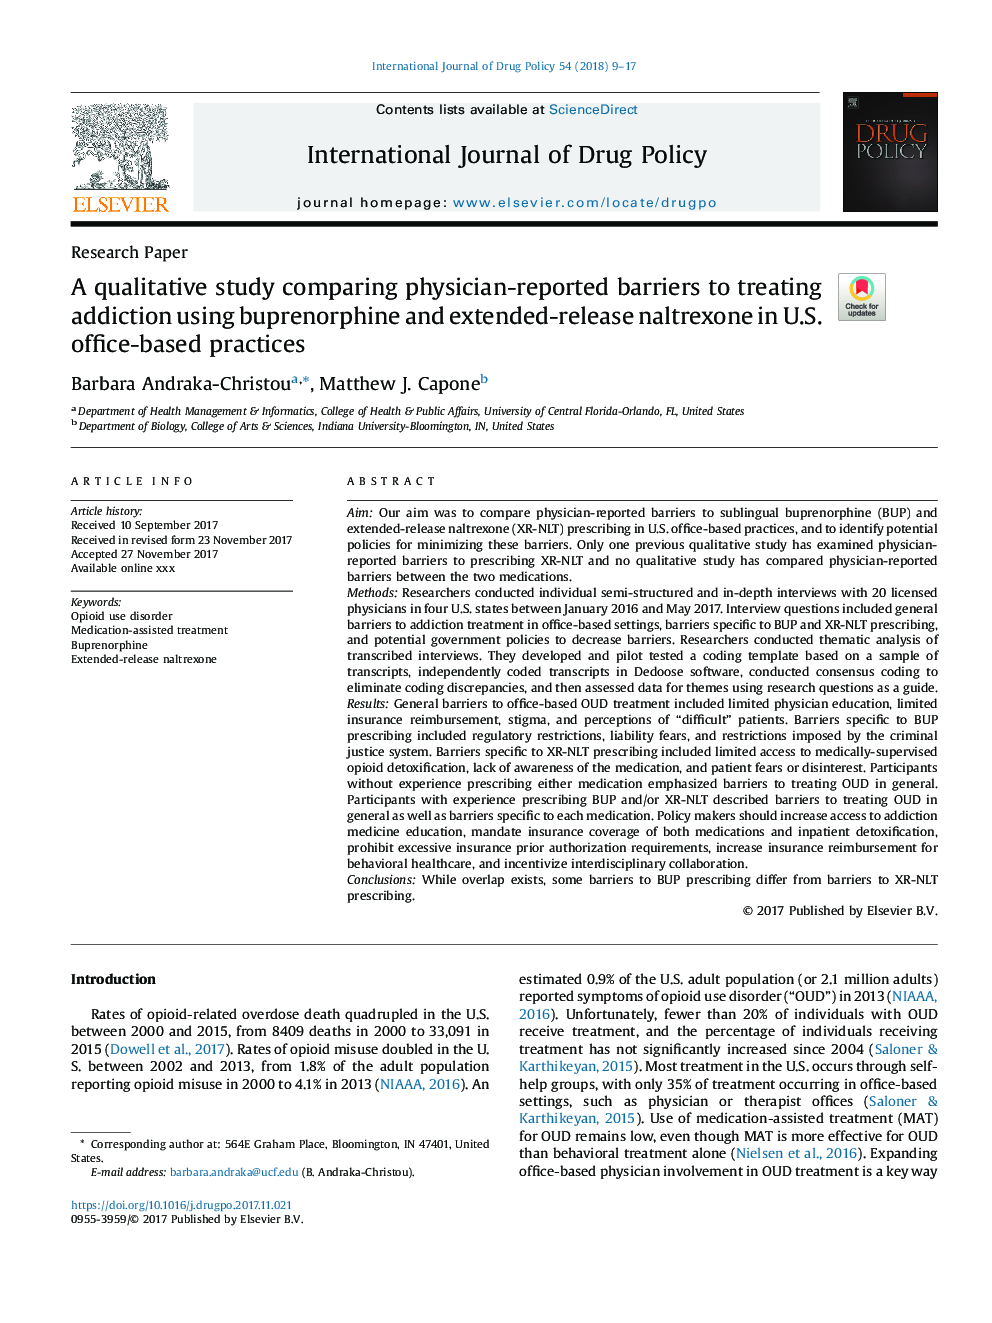 A qualitative study comparing physician-reported barriers to treating addiction using buprenorphine and extended-release naltrexone in U.S. office-based practices